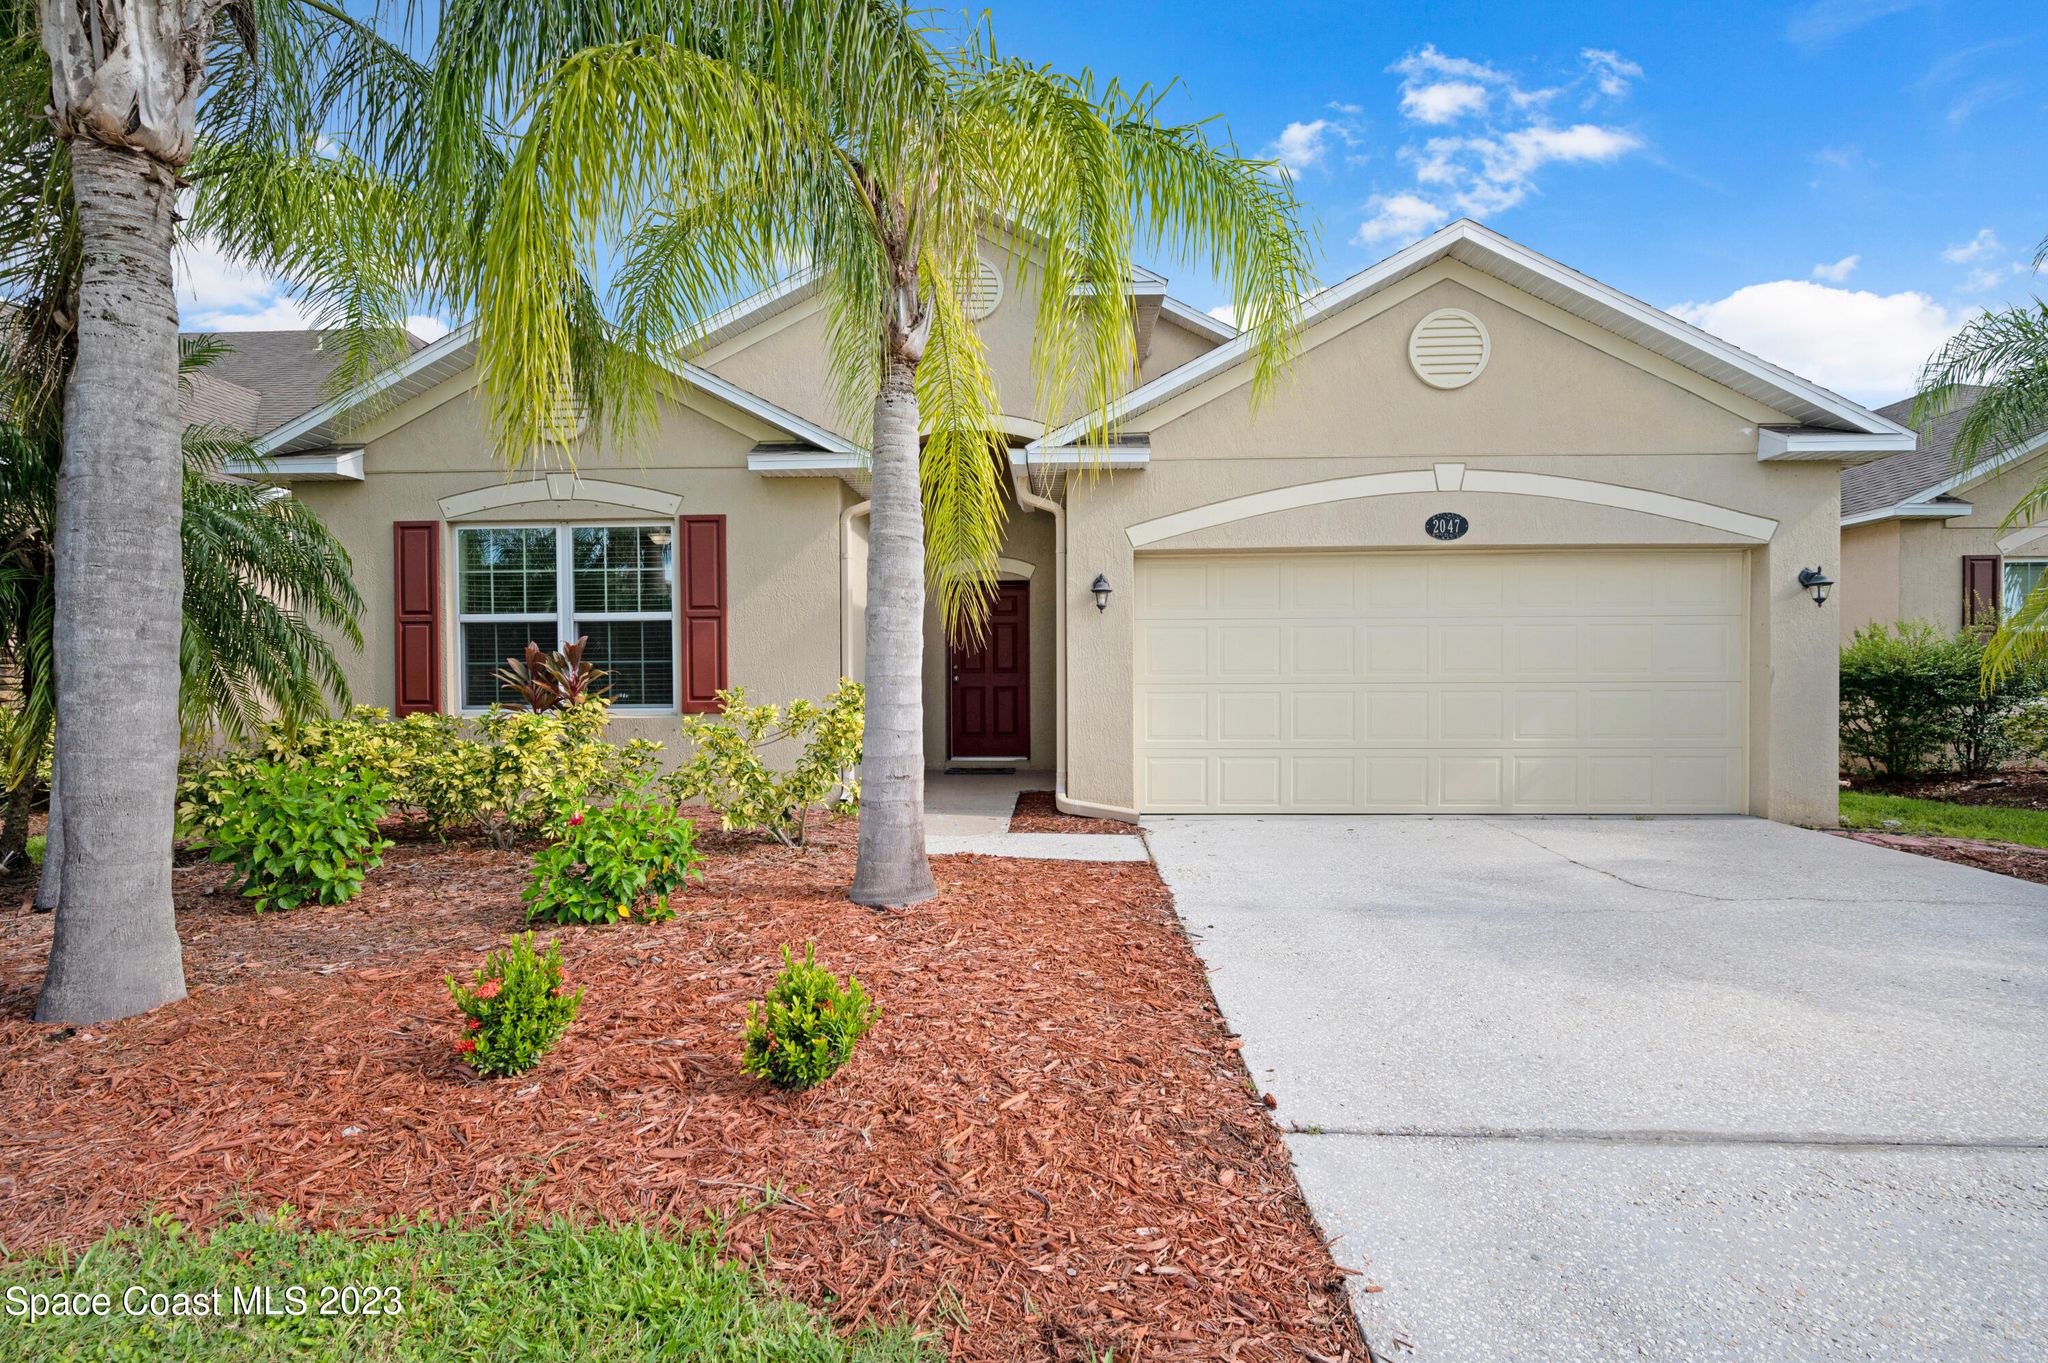 2047 Neveah Ave NW, Palm Bay, FL 32907 | Trulia